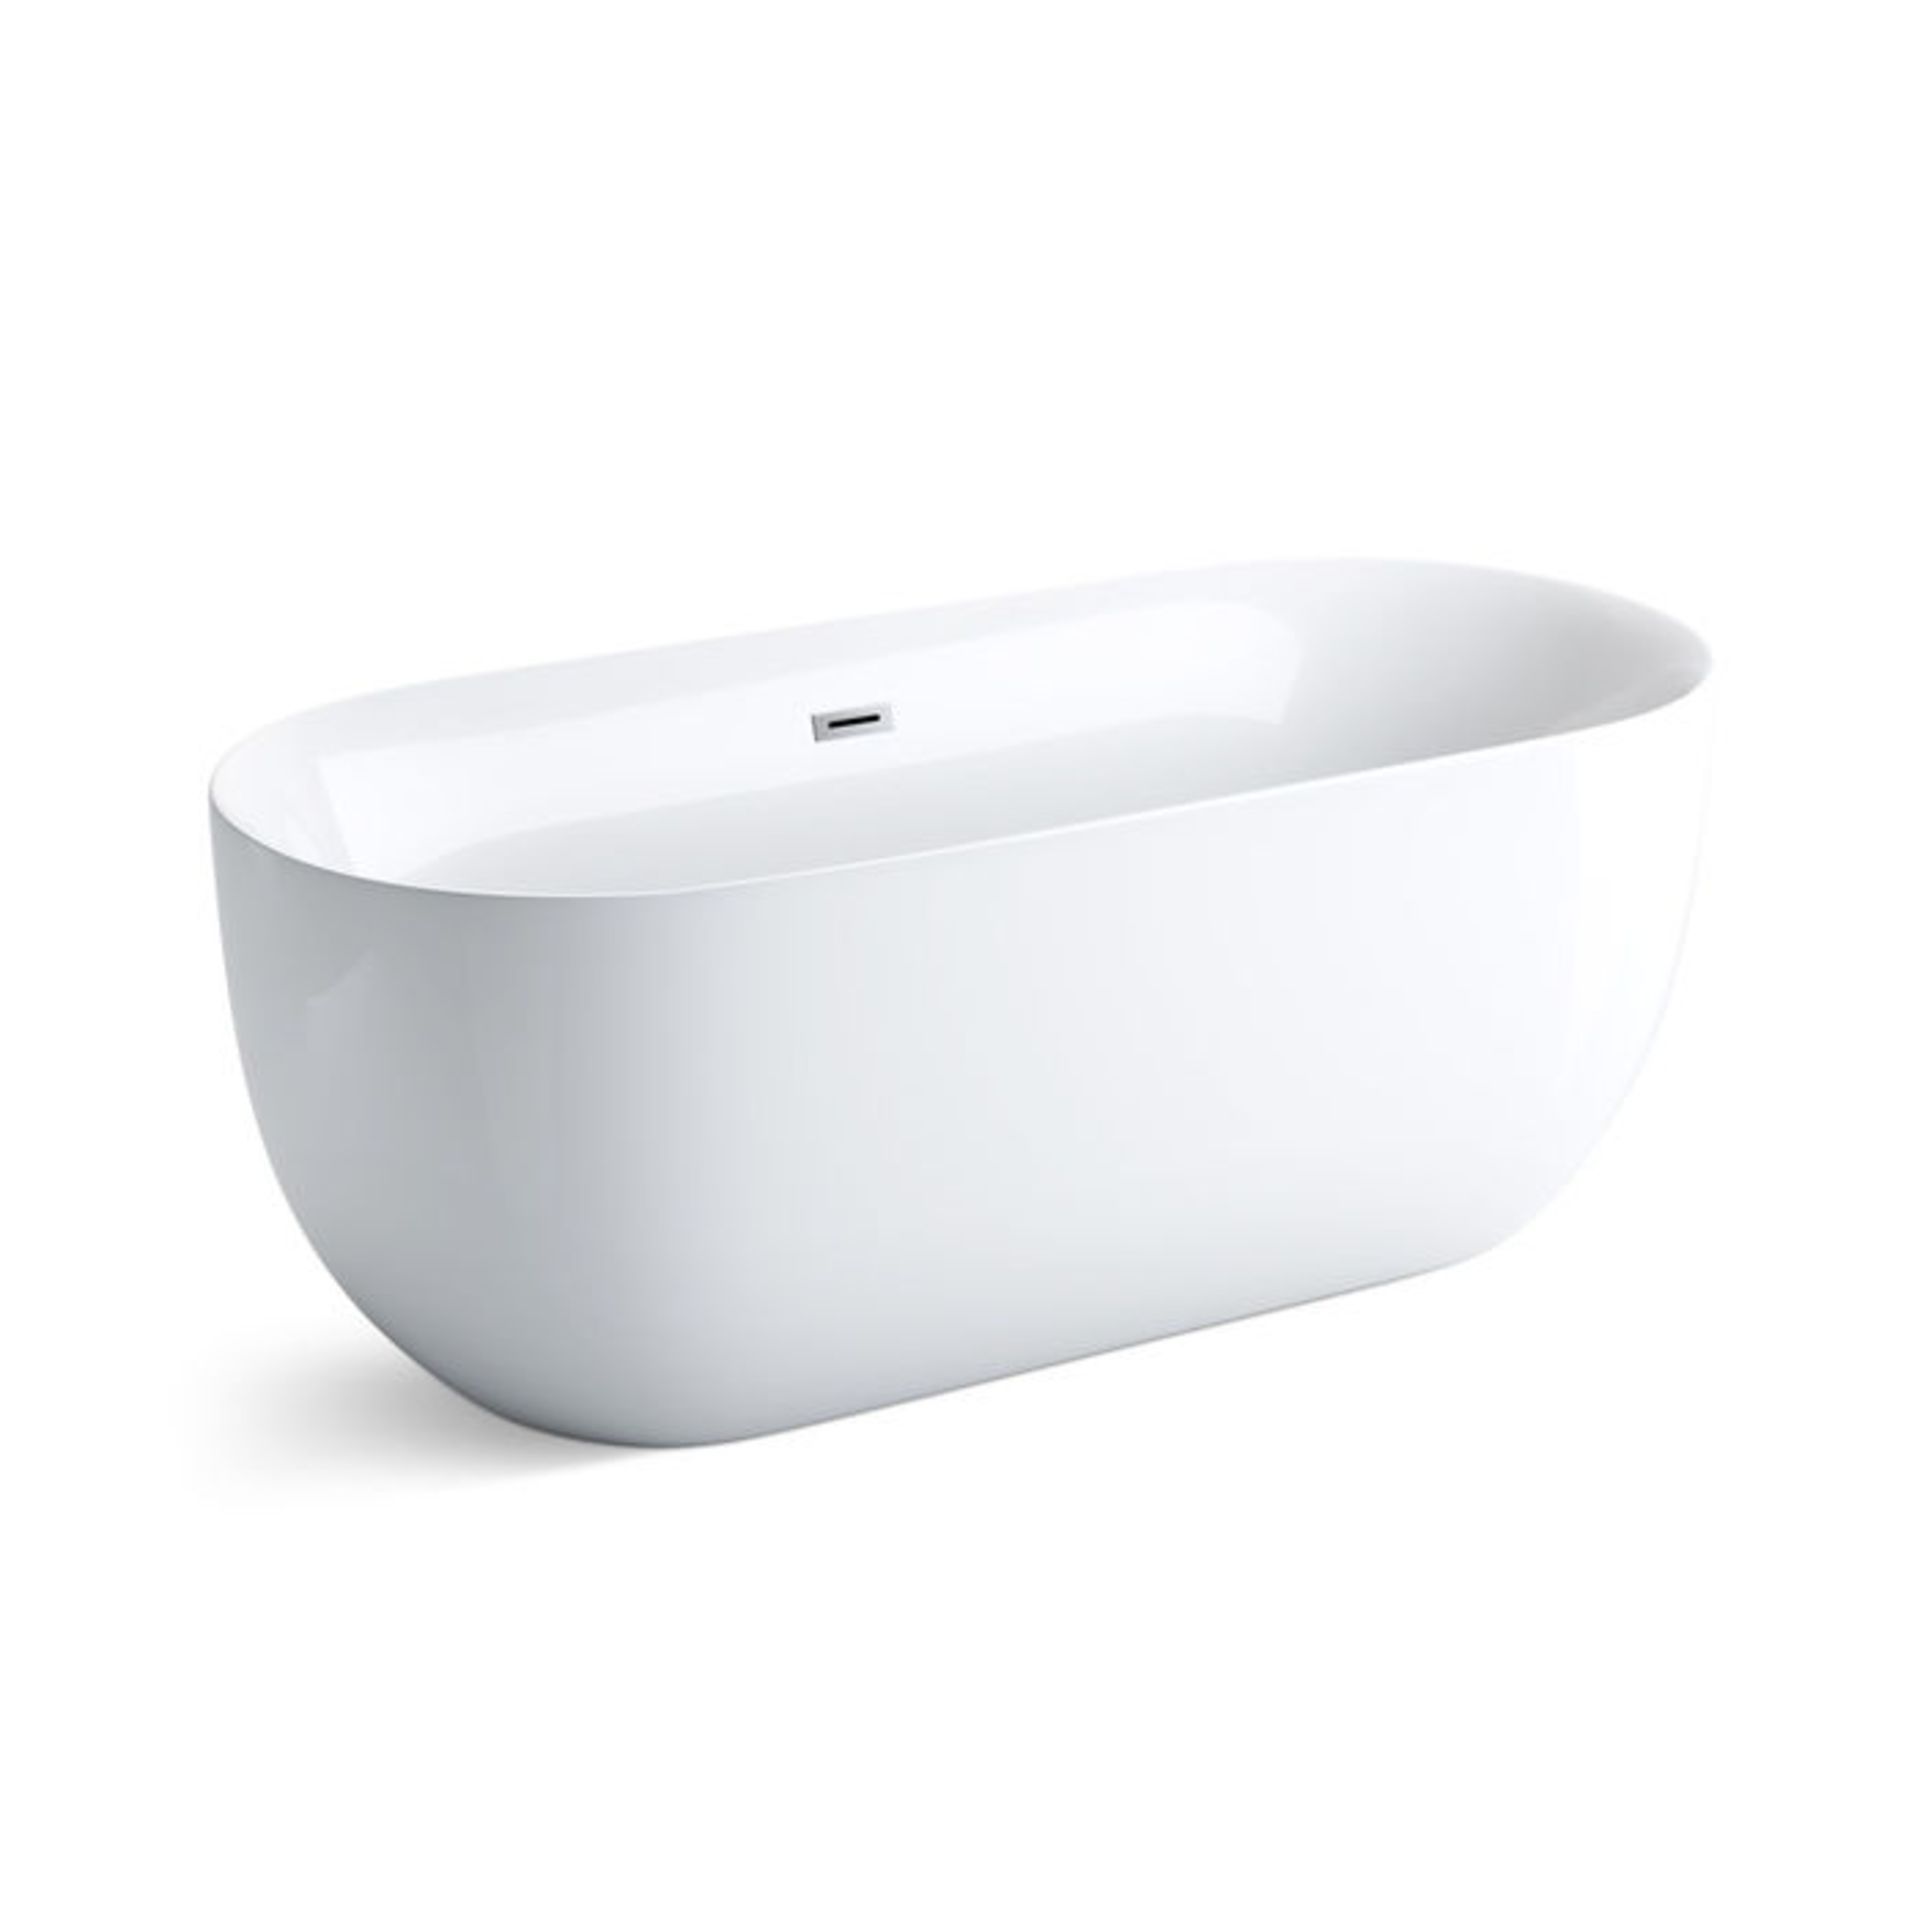 (DK3) 1700mmx780mm Mya Freestanding Bath. Showcasing style charm for a centre piece - Image 3 of 4